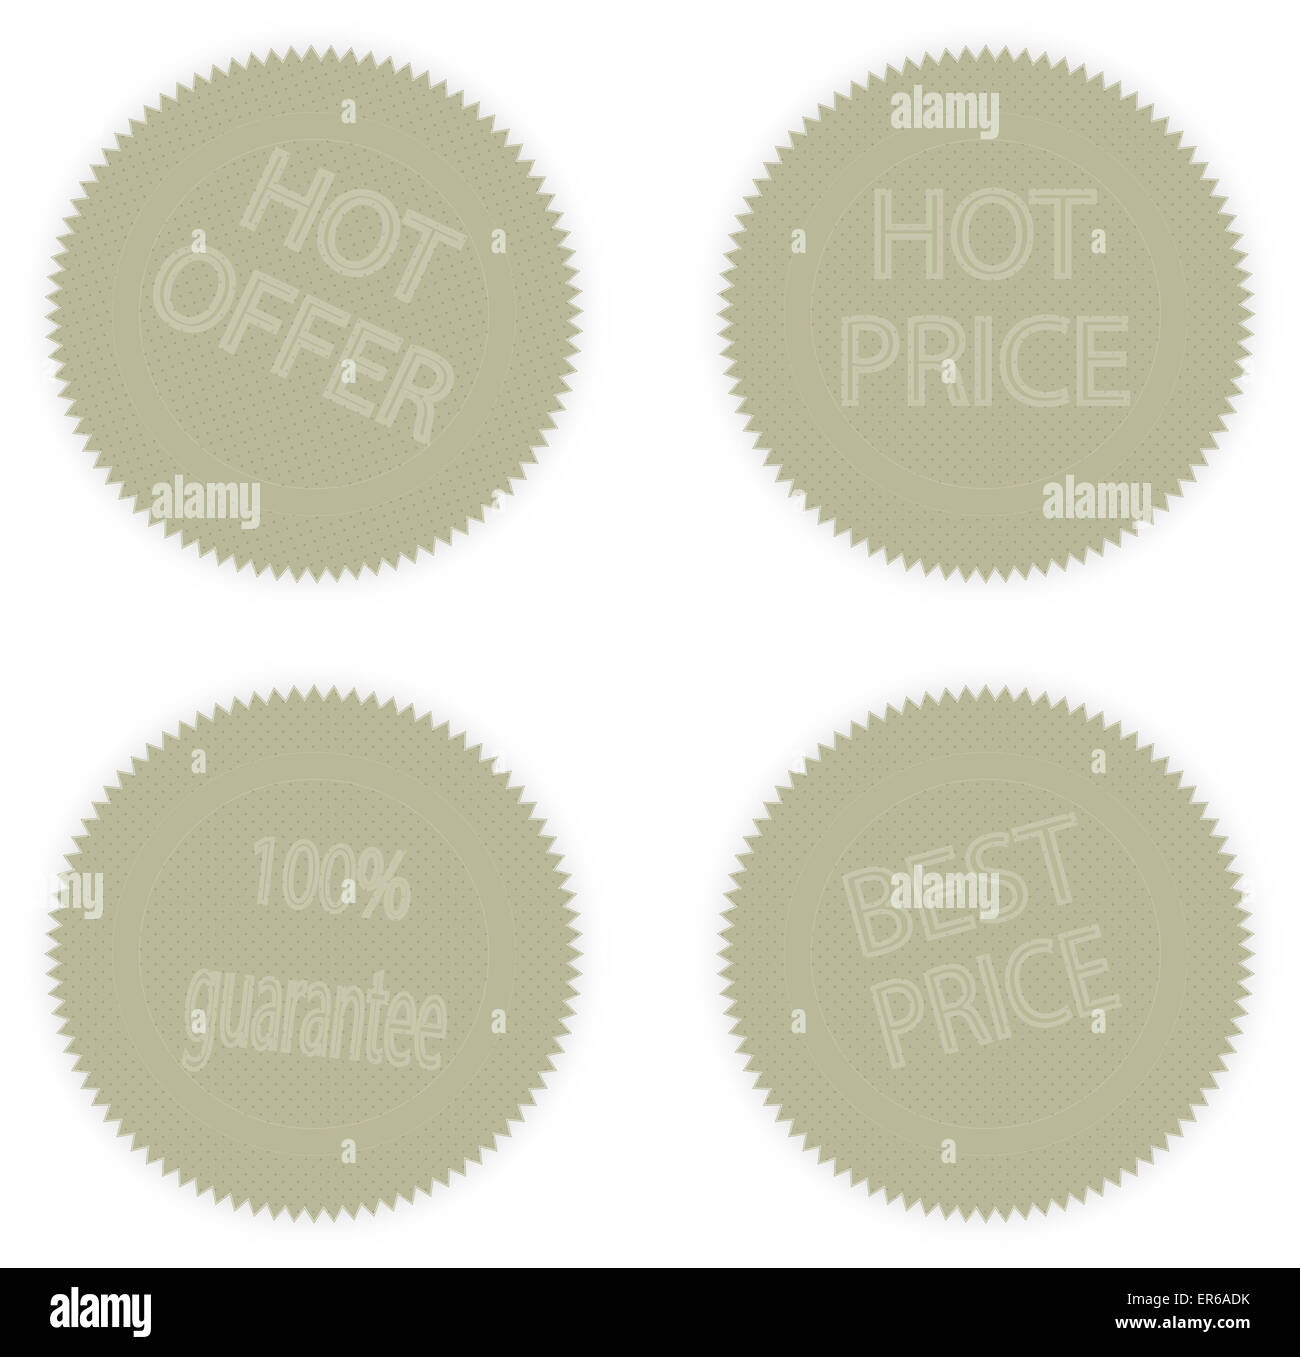 Set of stickers warranty. hot or best price. Vector illustration Stock Photo